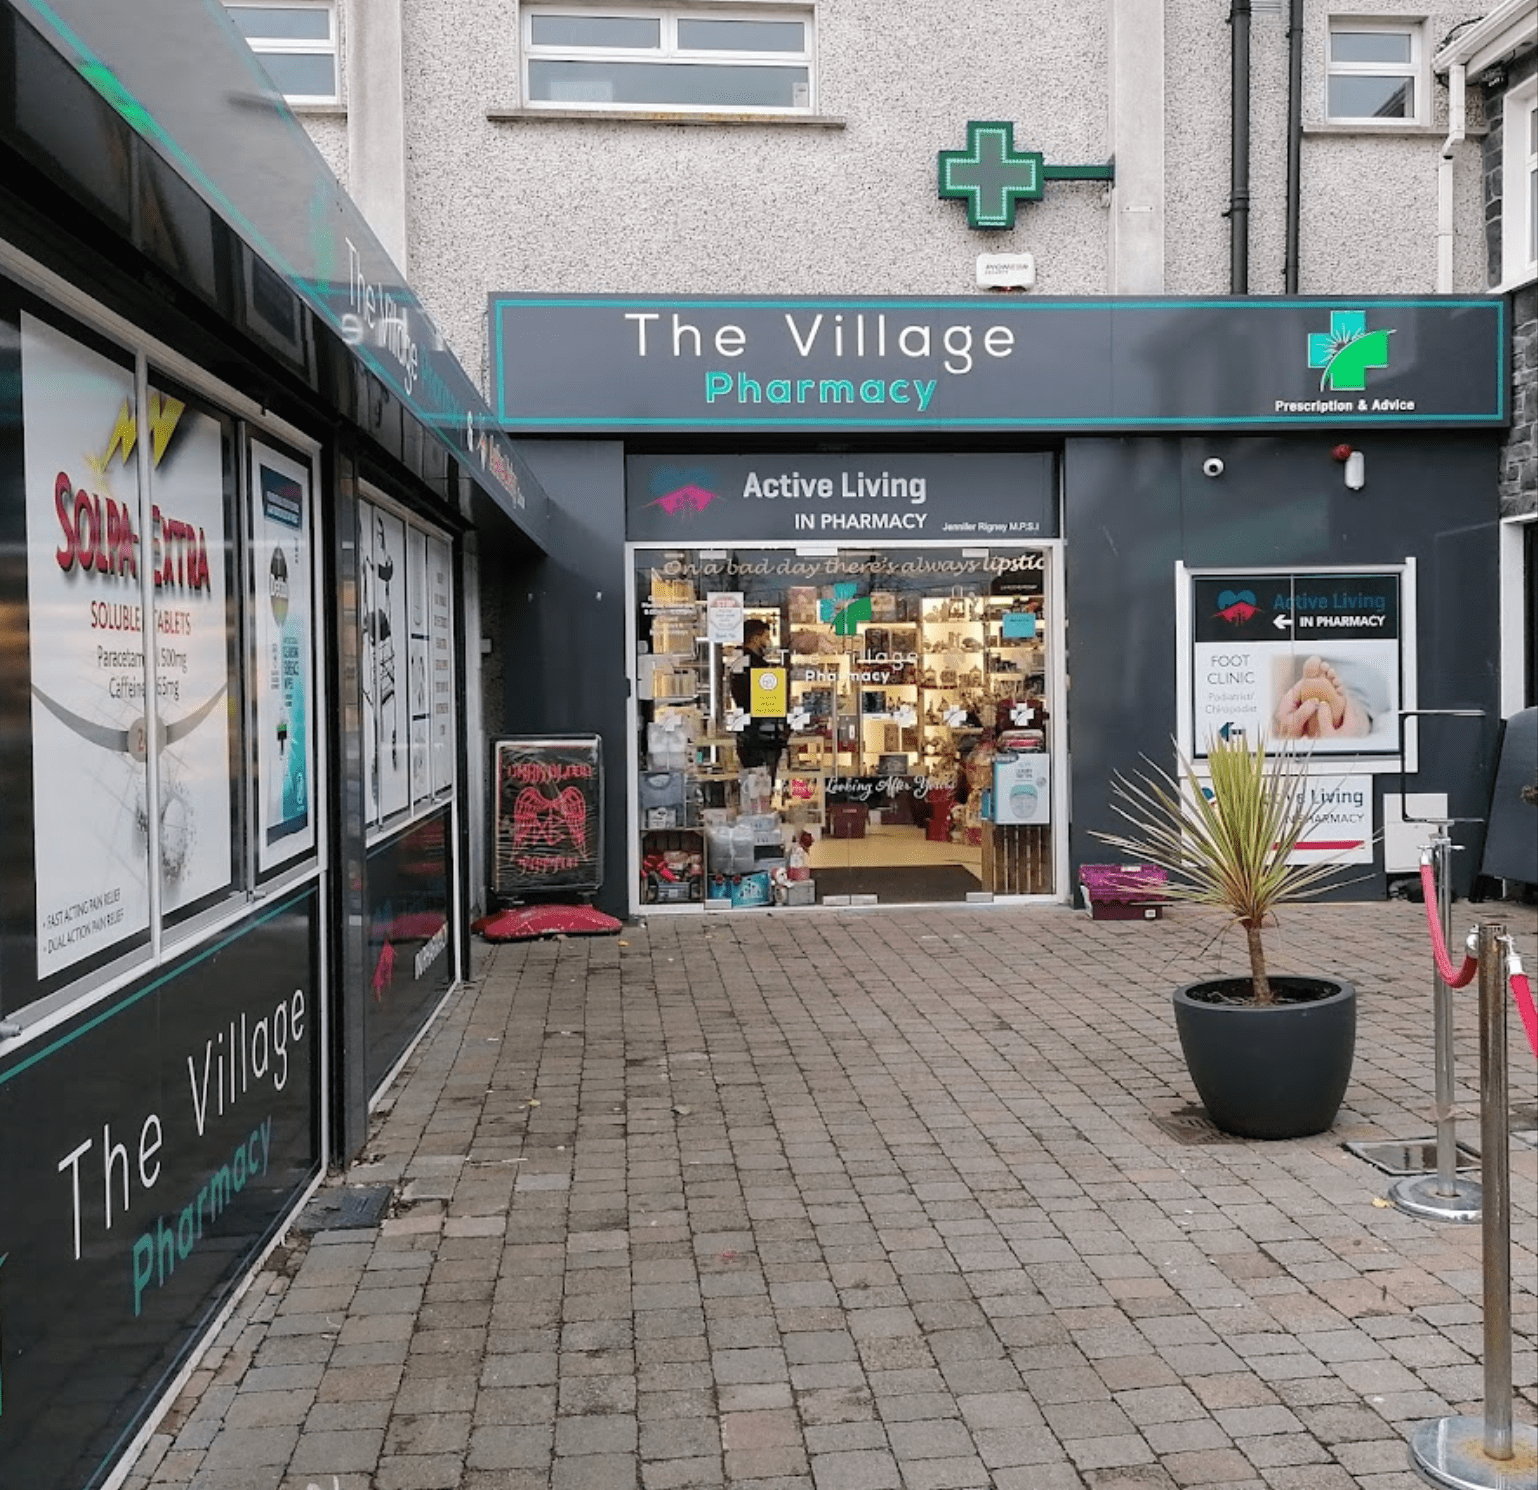 The Village Pharmacy in Dublin, Ireland has equipped their point of sale with the Countermatic solution.